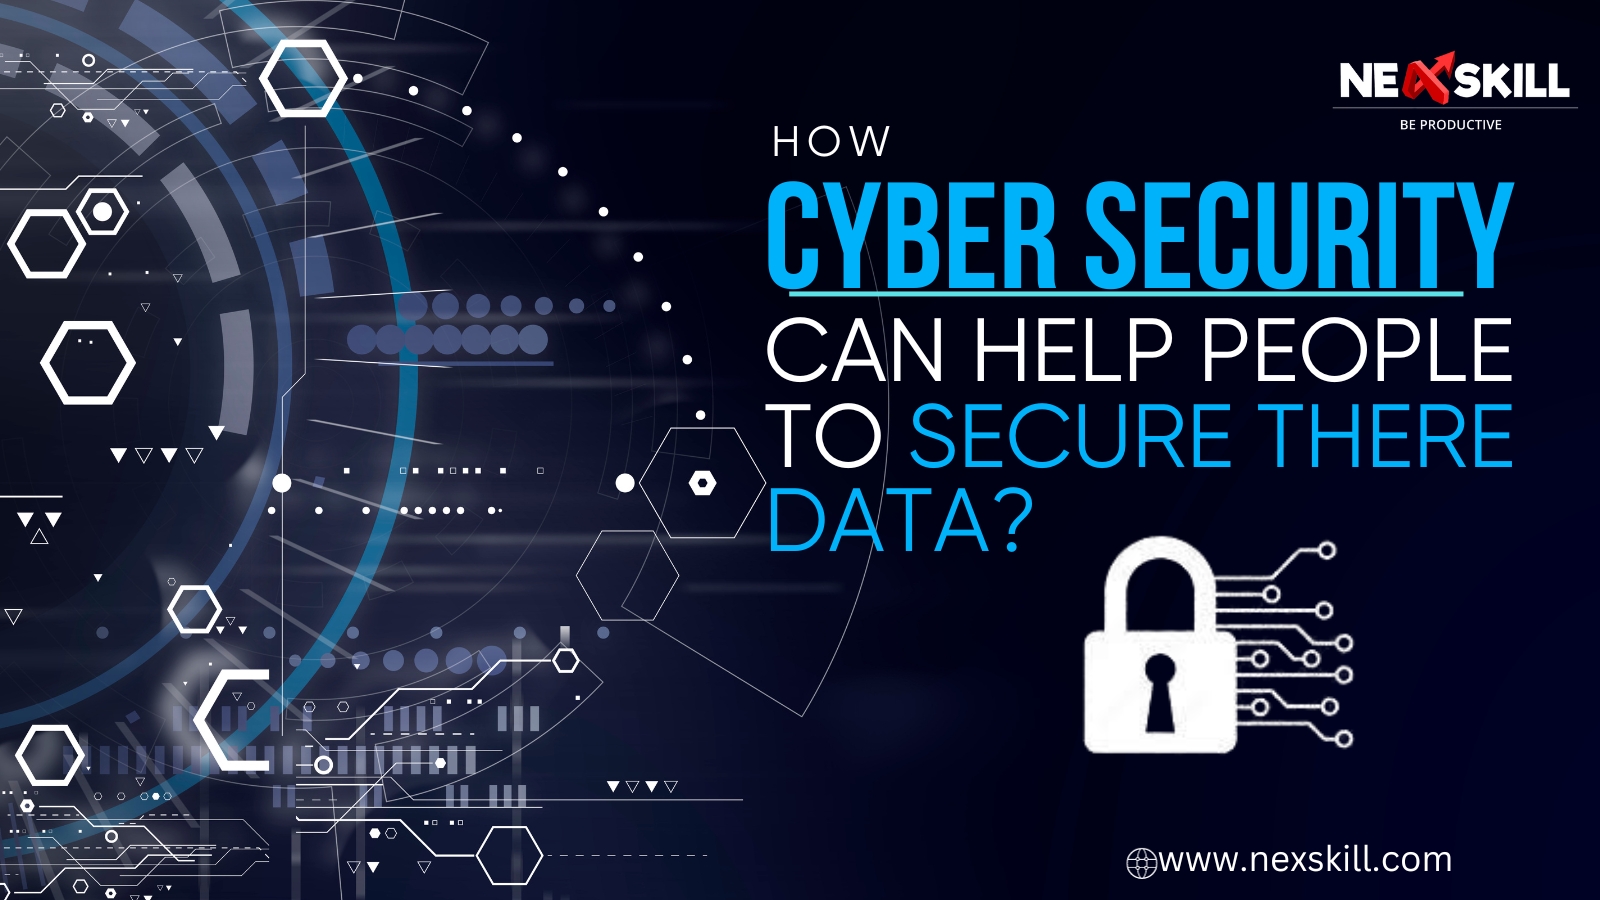 How Cyber Security Can Help People To Secure Their Data?